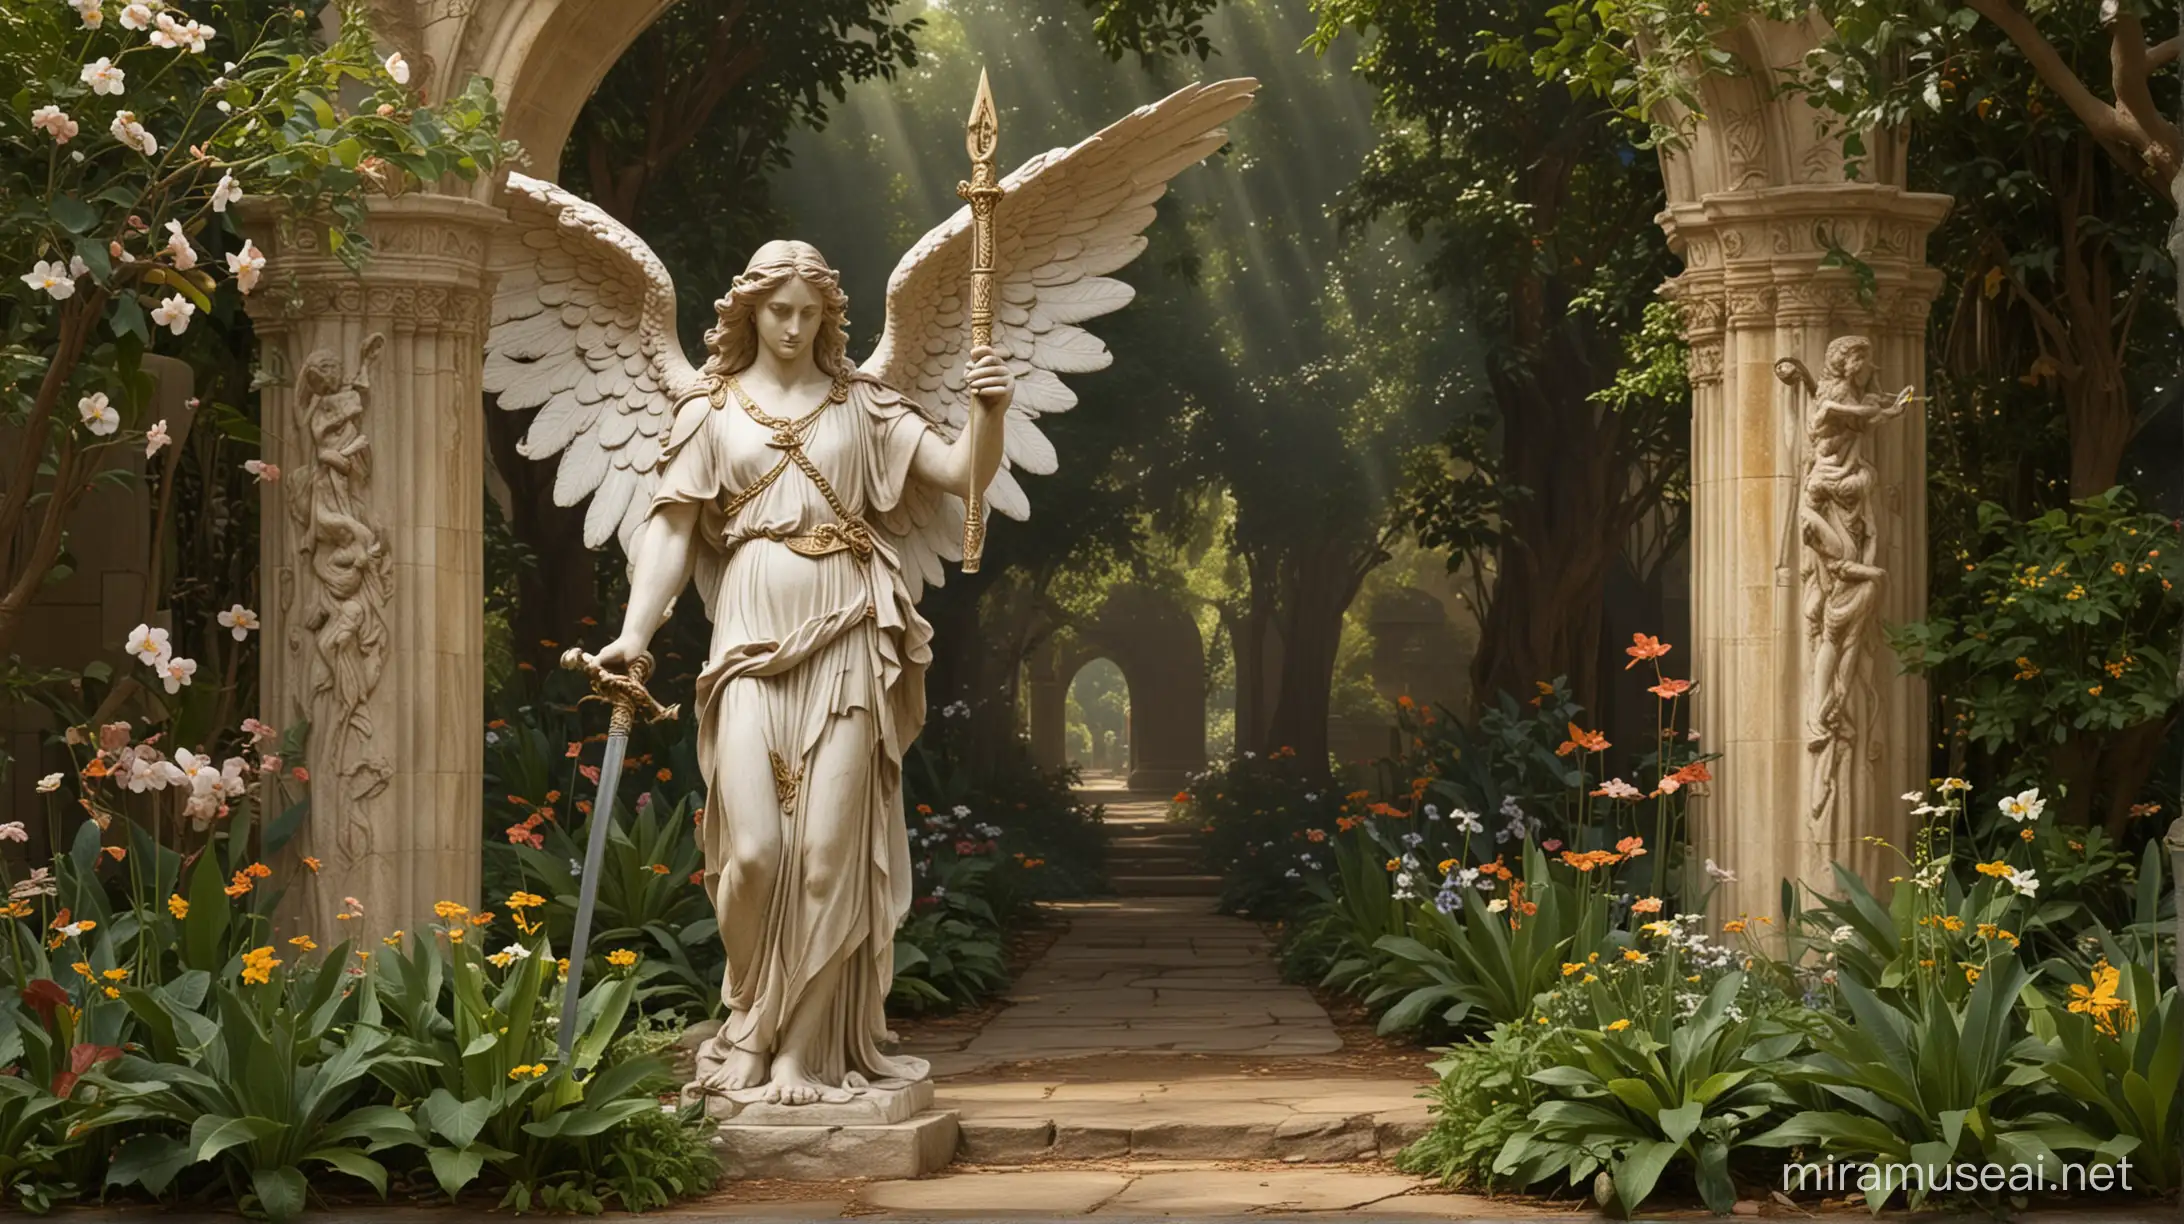 a angel guarding the entrance of the Garden of Eden with his sword drawn